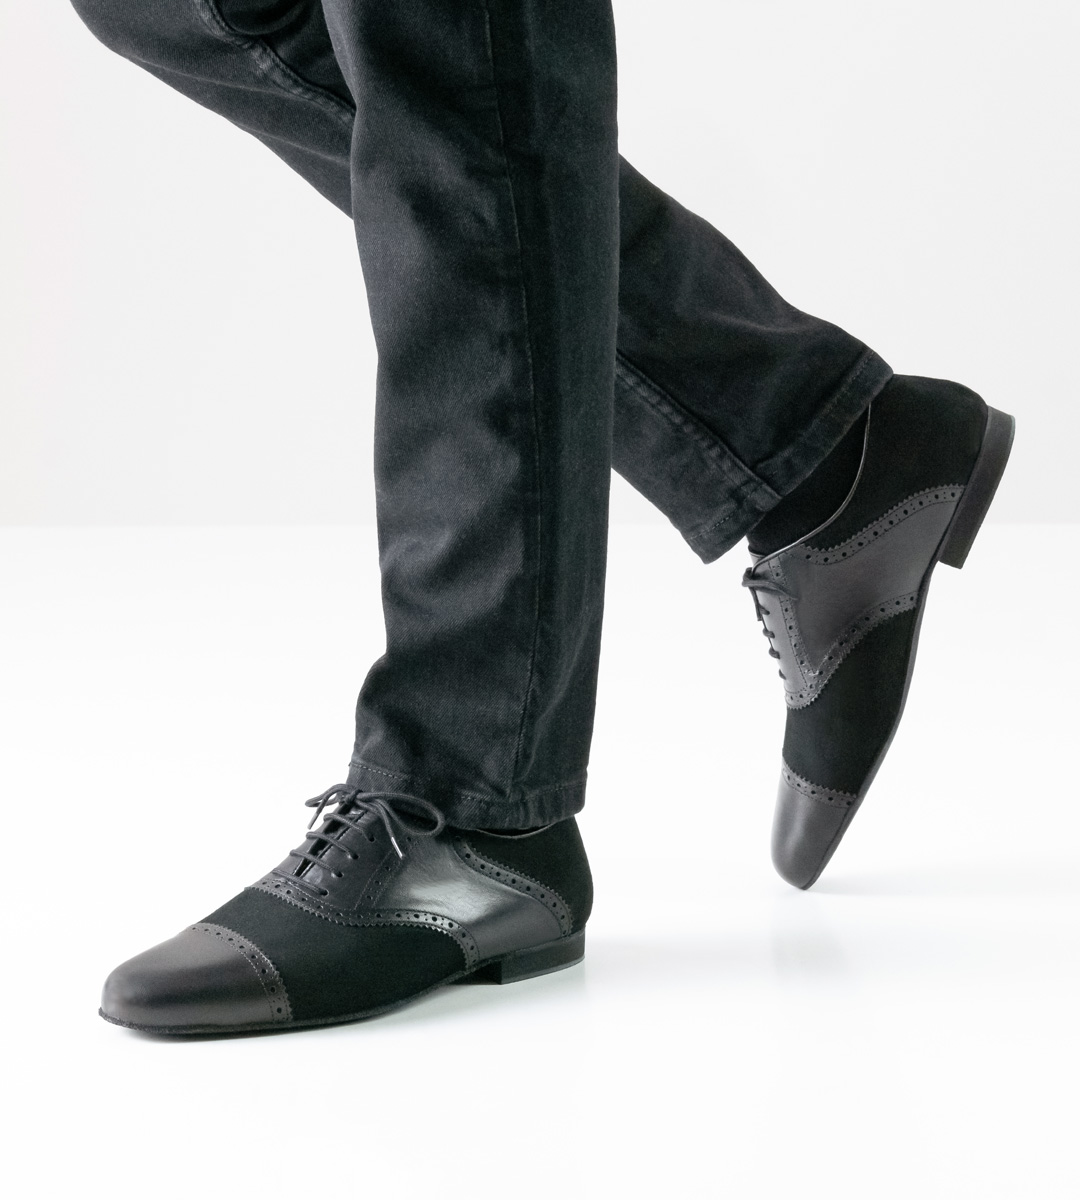 Men's dance shoe by Werner Kern in combination of leather and suede